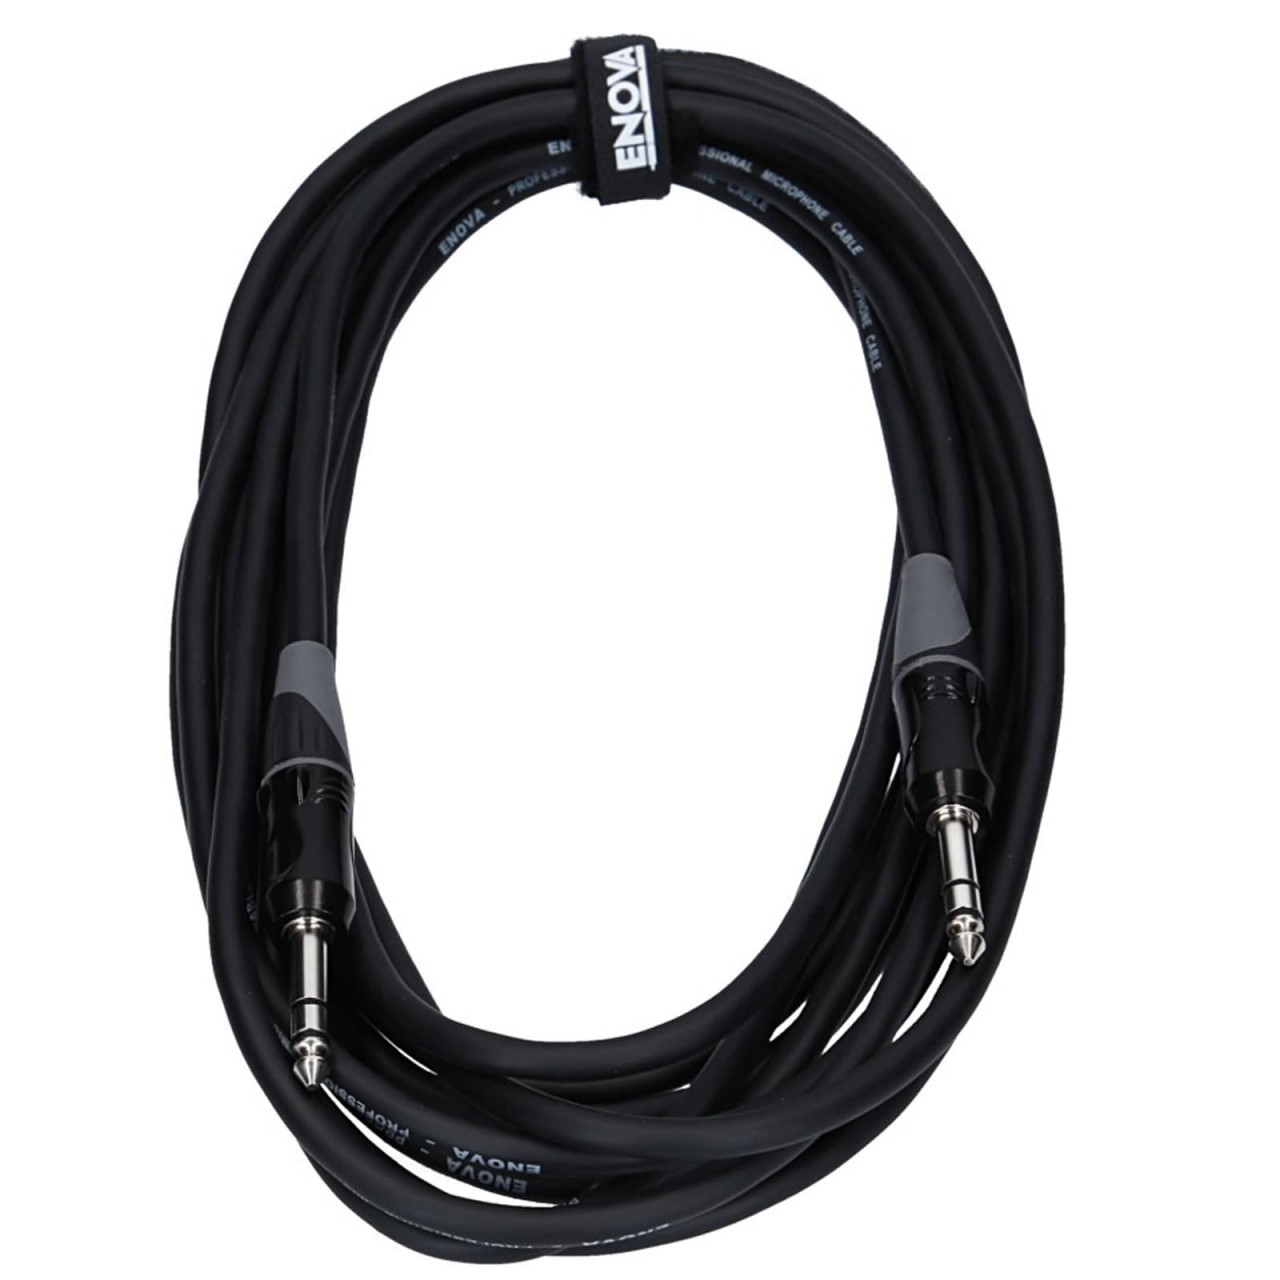 0.2 M jack cable balanced - Pro Audio cable from Enova Solutions AG